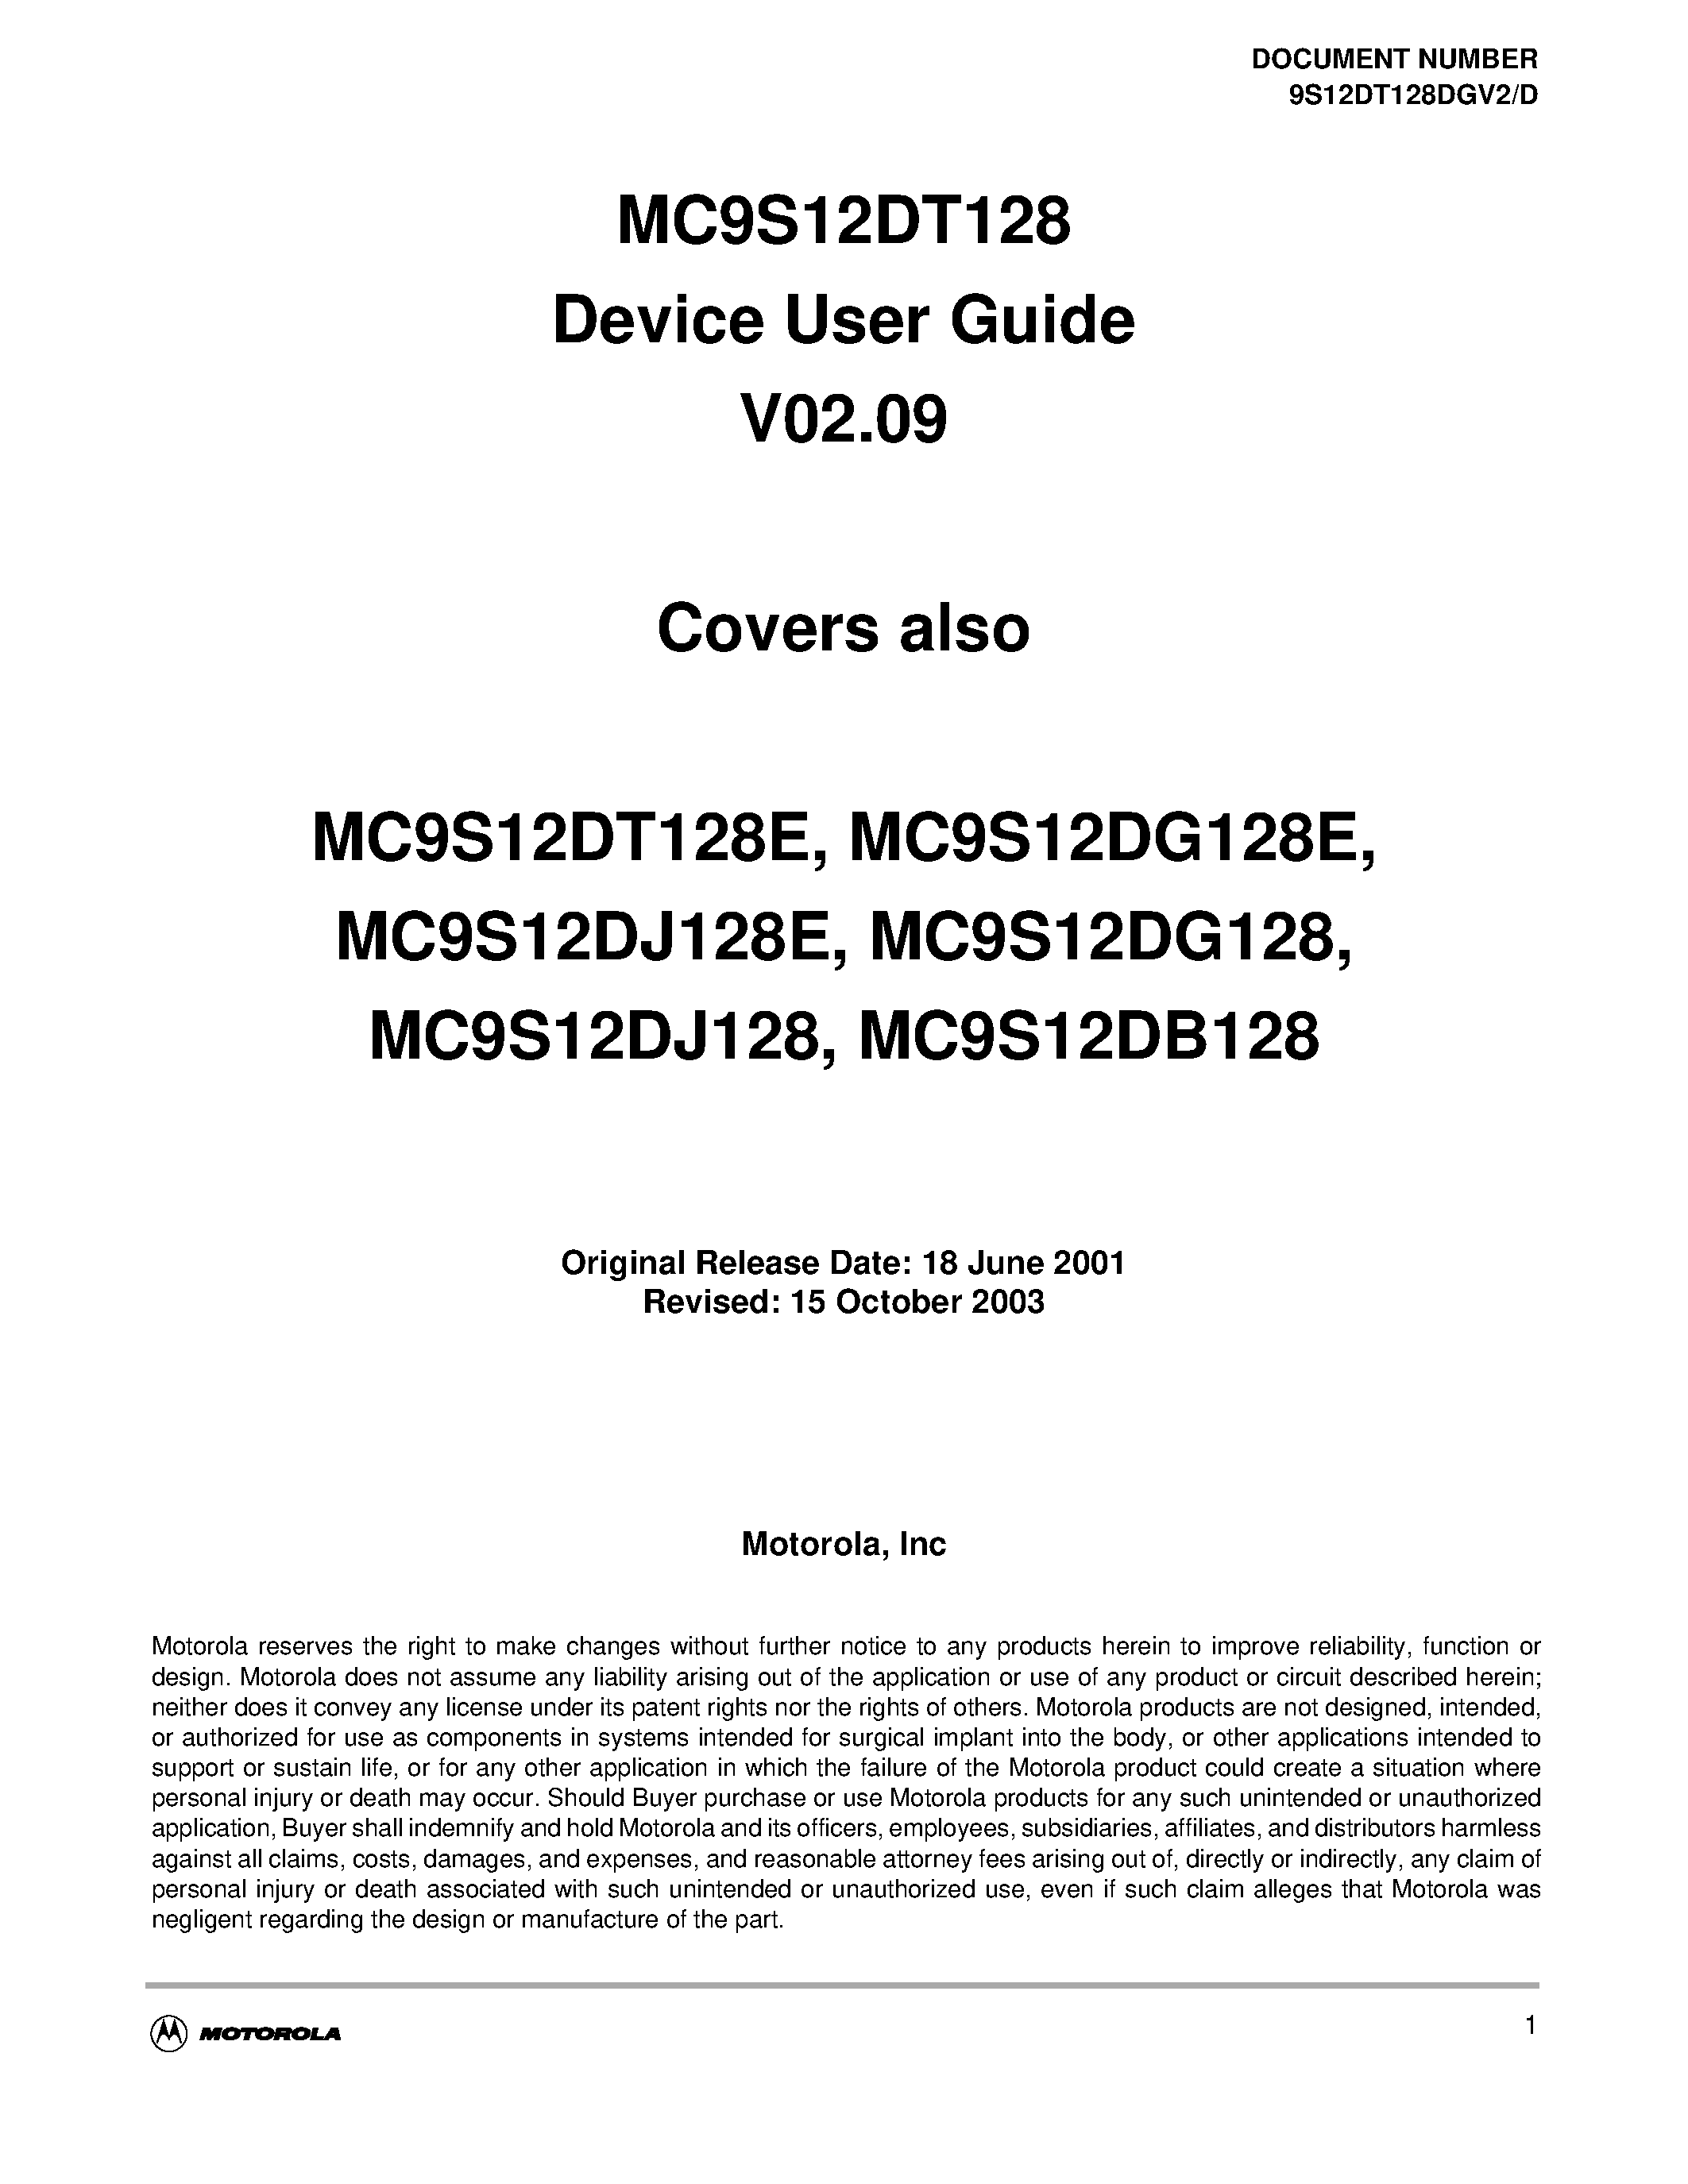 Datasheet S12DTB128PIMV2 - MC9S12DT128 Device User Guide V02.09 page 1